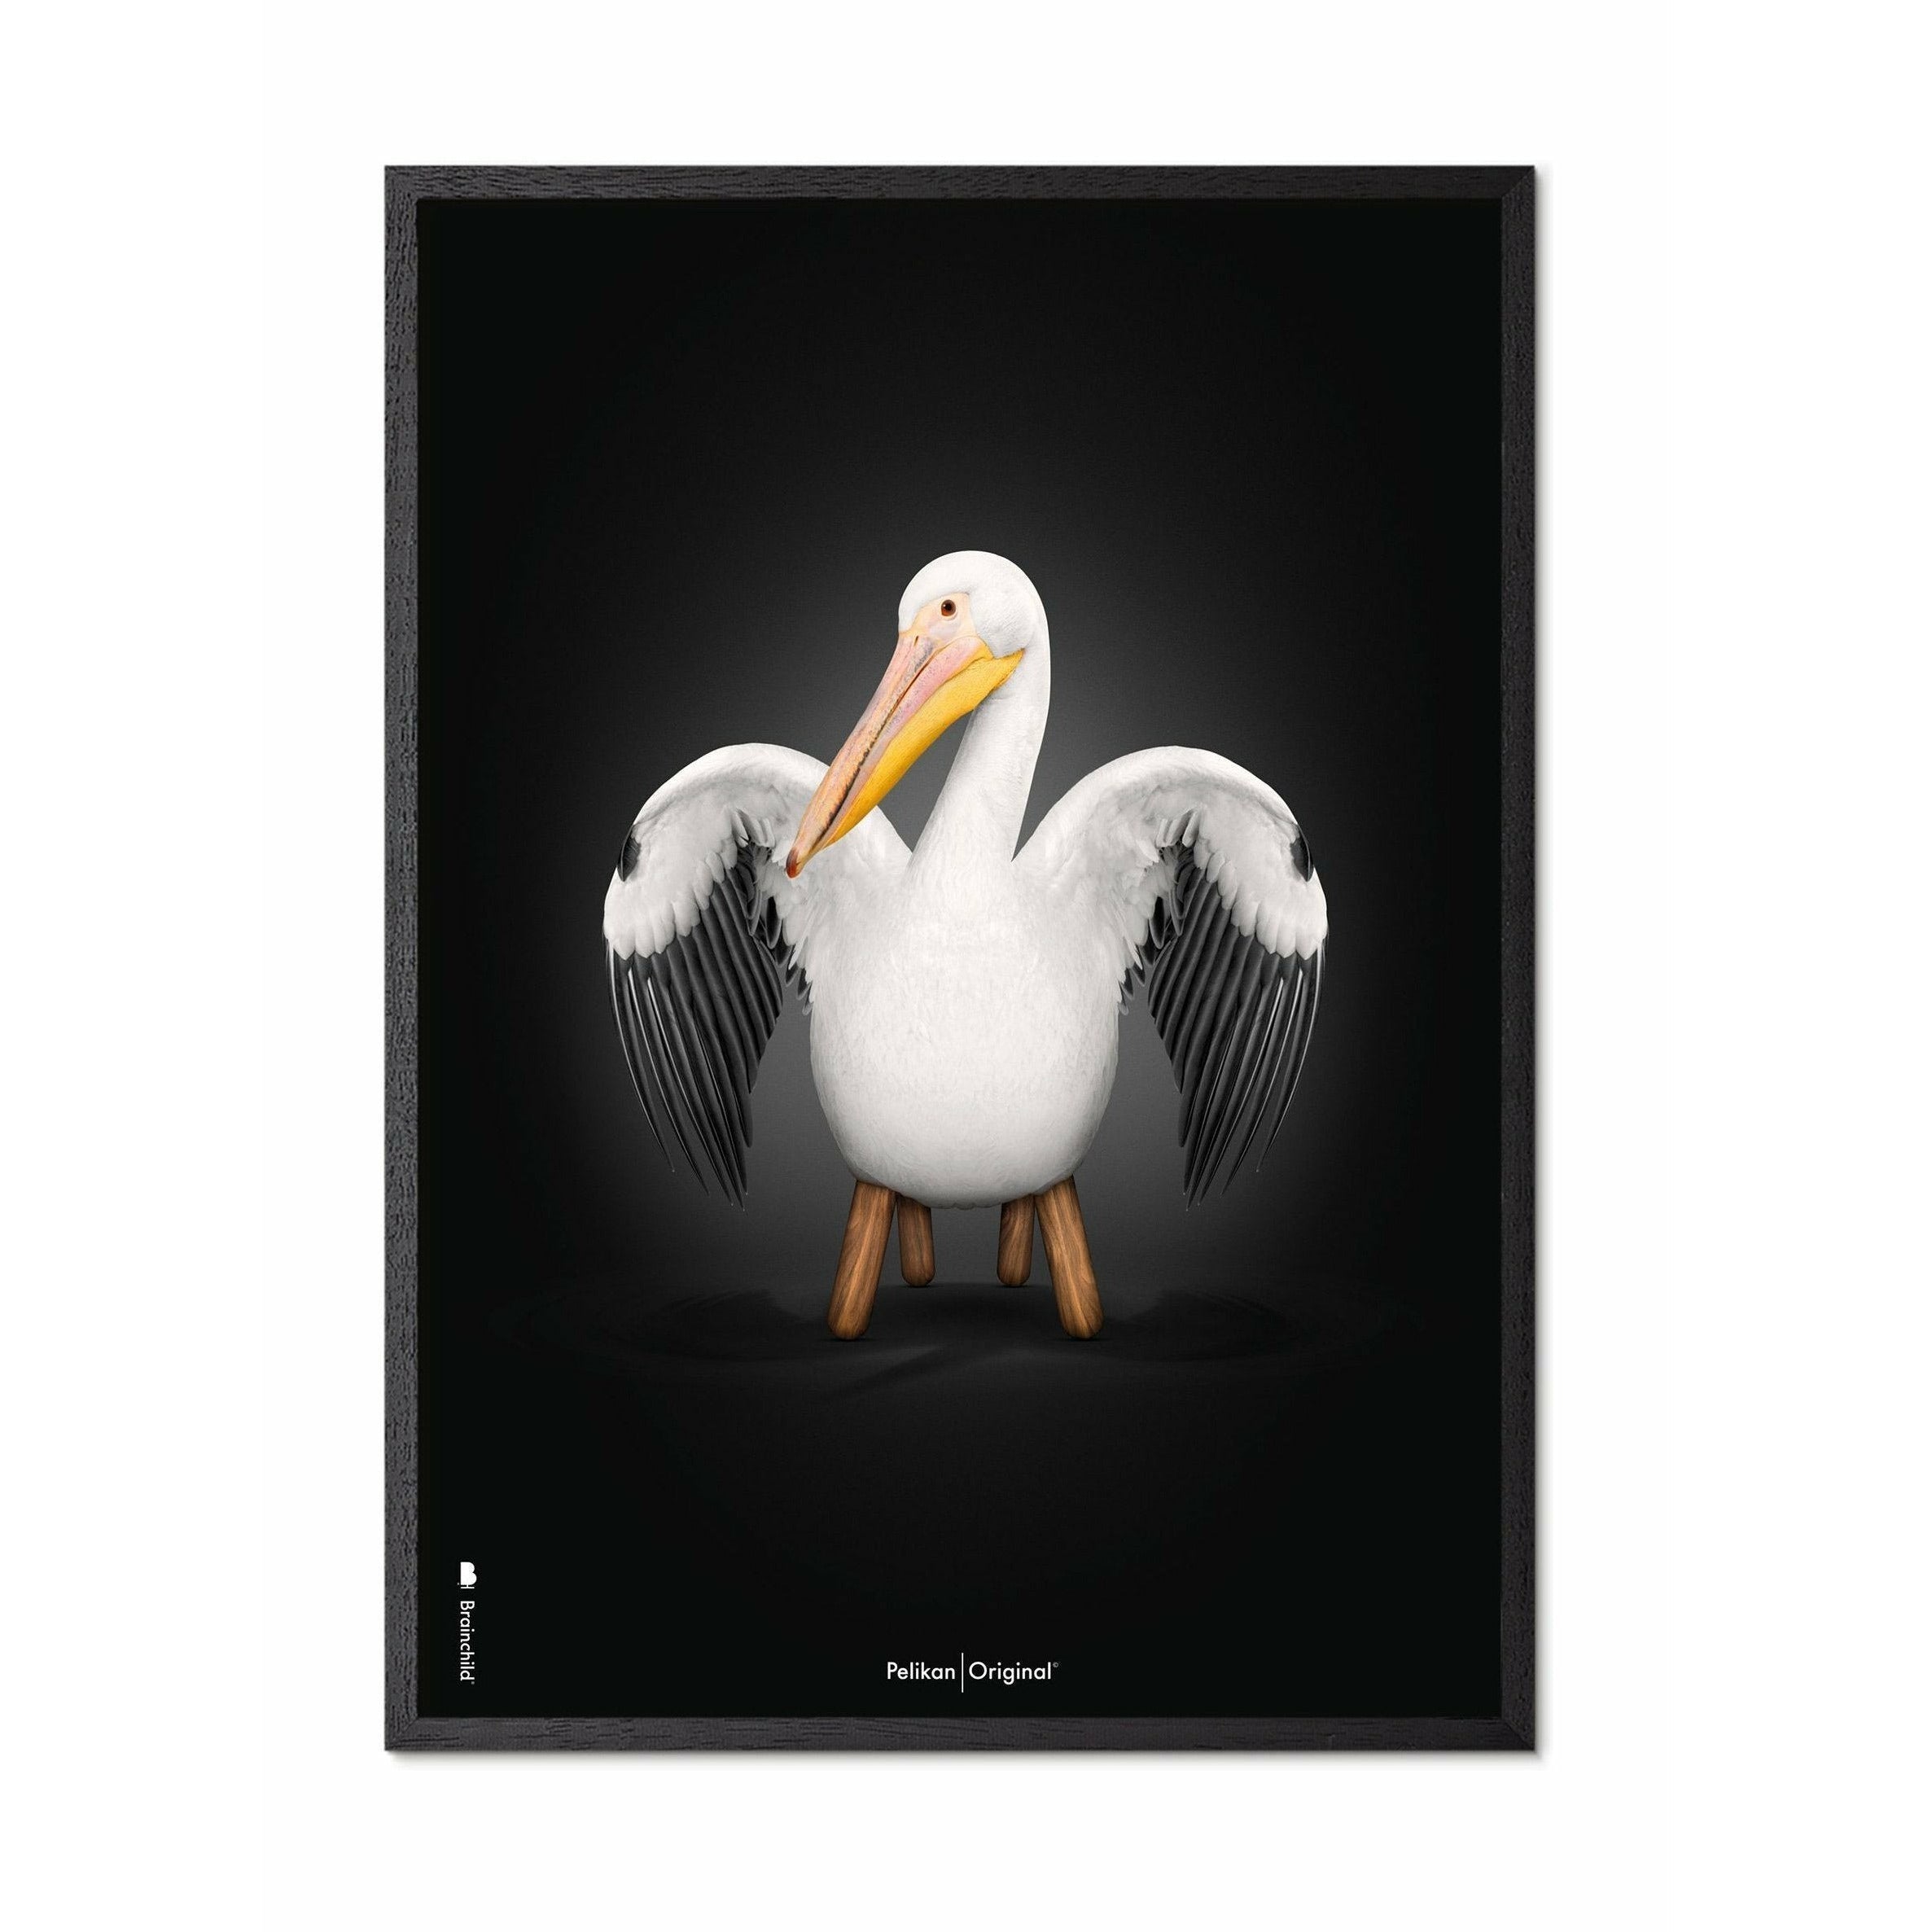 Brainchild Pelikan Classic Poster, Frame In Black Lacquered Wood 30x40 Cm, Black Background